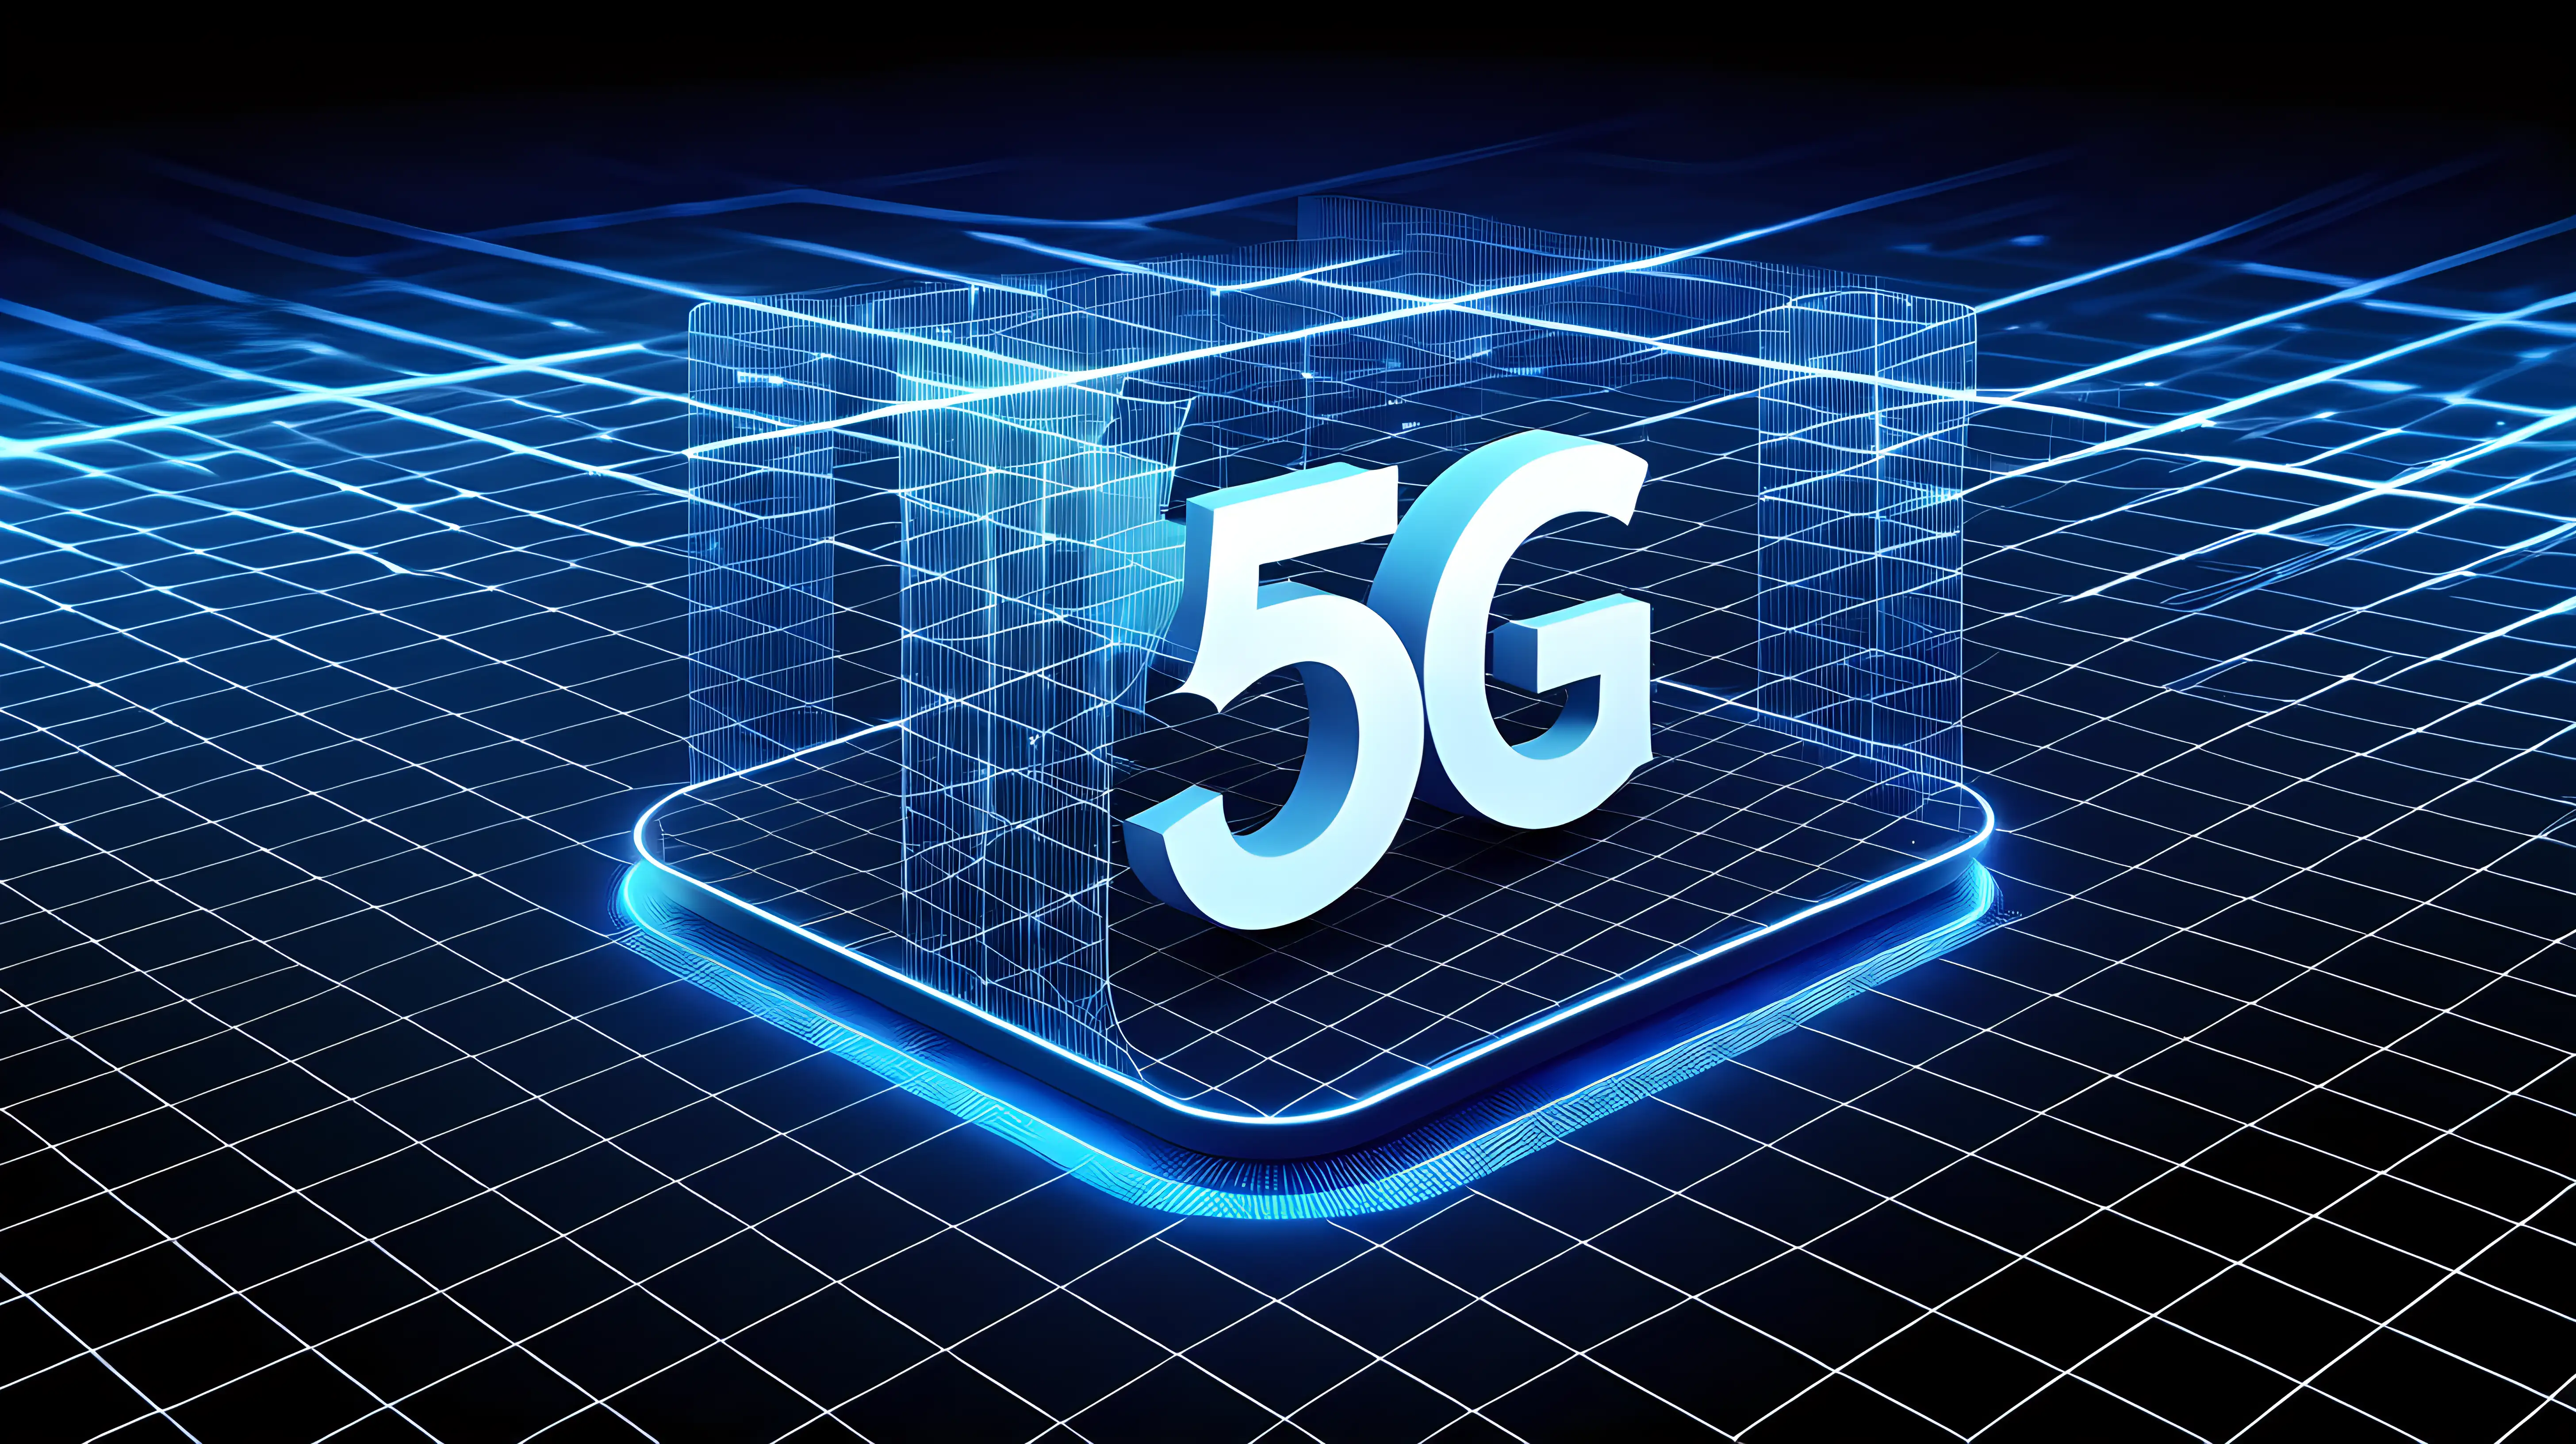 A sleek and modern representation of 5G, with the iconic "5G" symbol centered in the image against a backdrop of illuminated futuristic lines and a grid pattern reminiscent of high-speed data transfer.